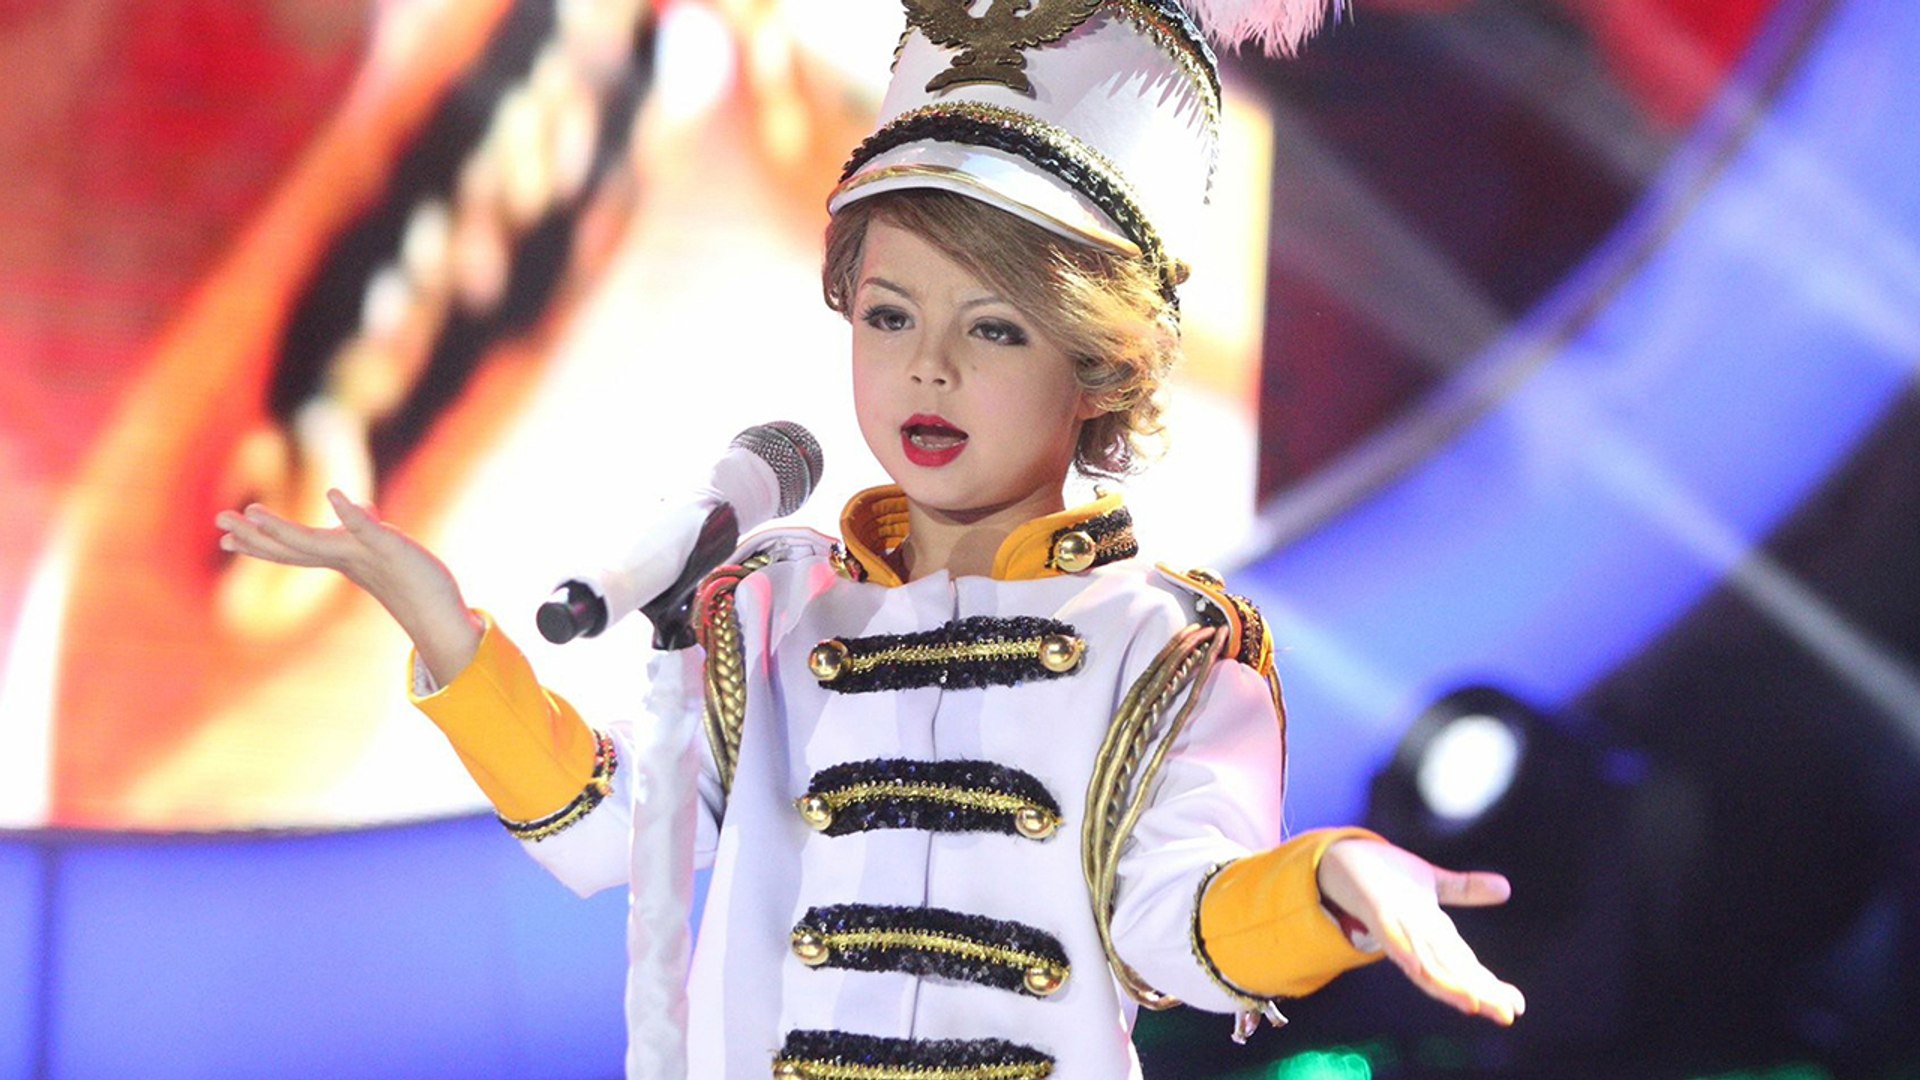 7 Year Girl Slays Taylor Swift’s ‘You Belong With Me’ Song